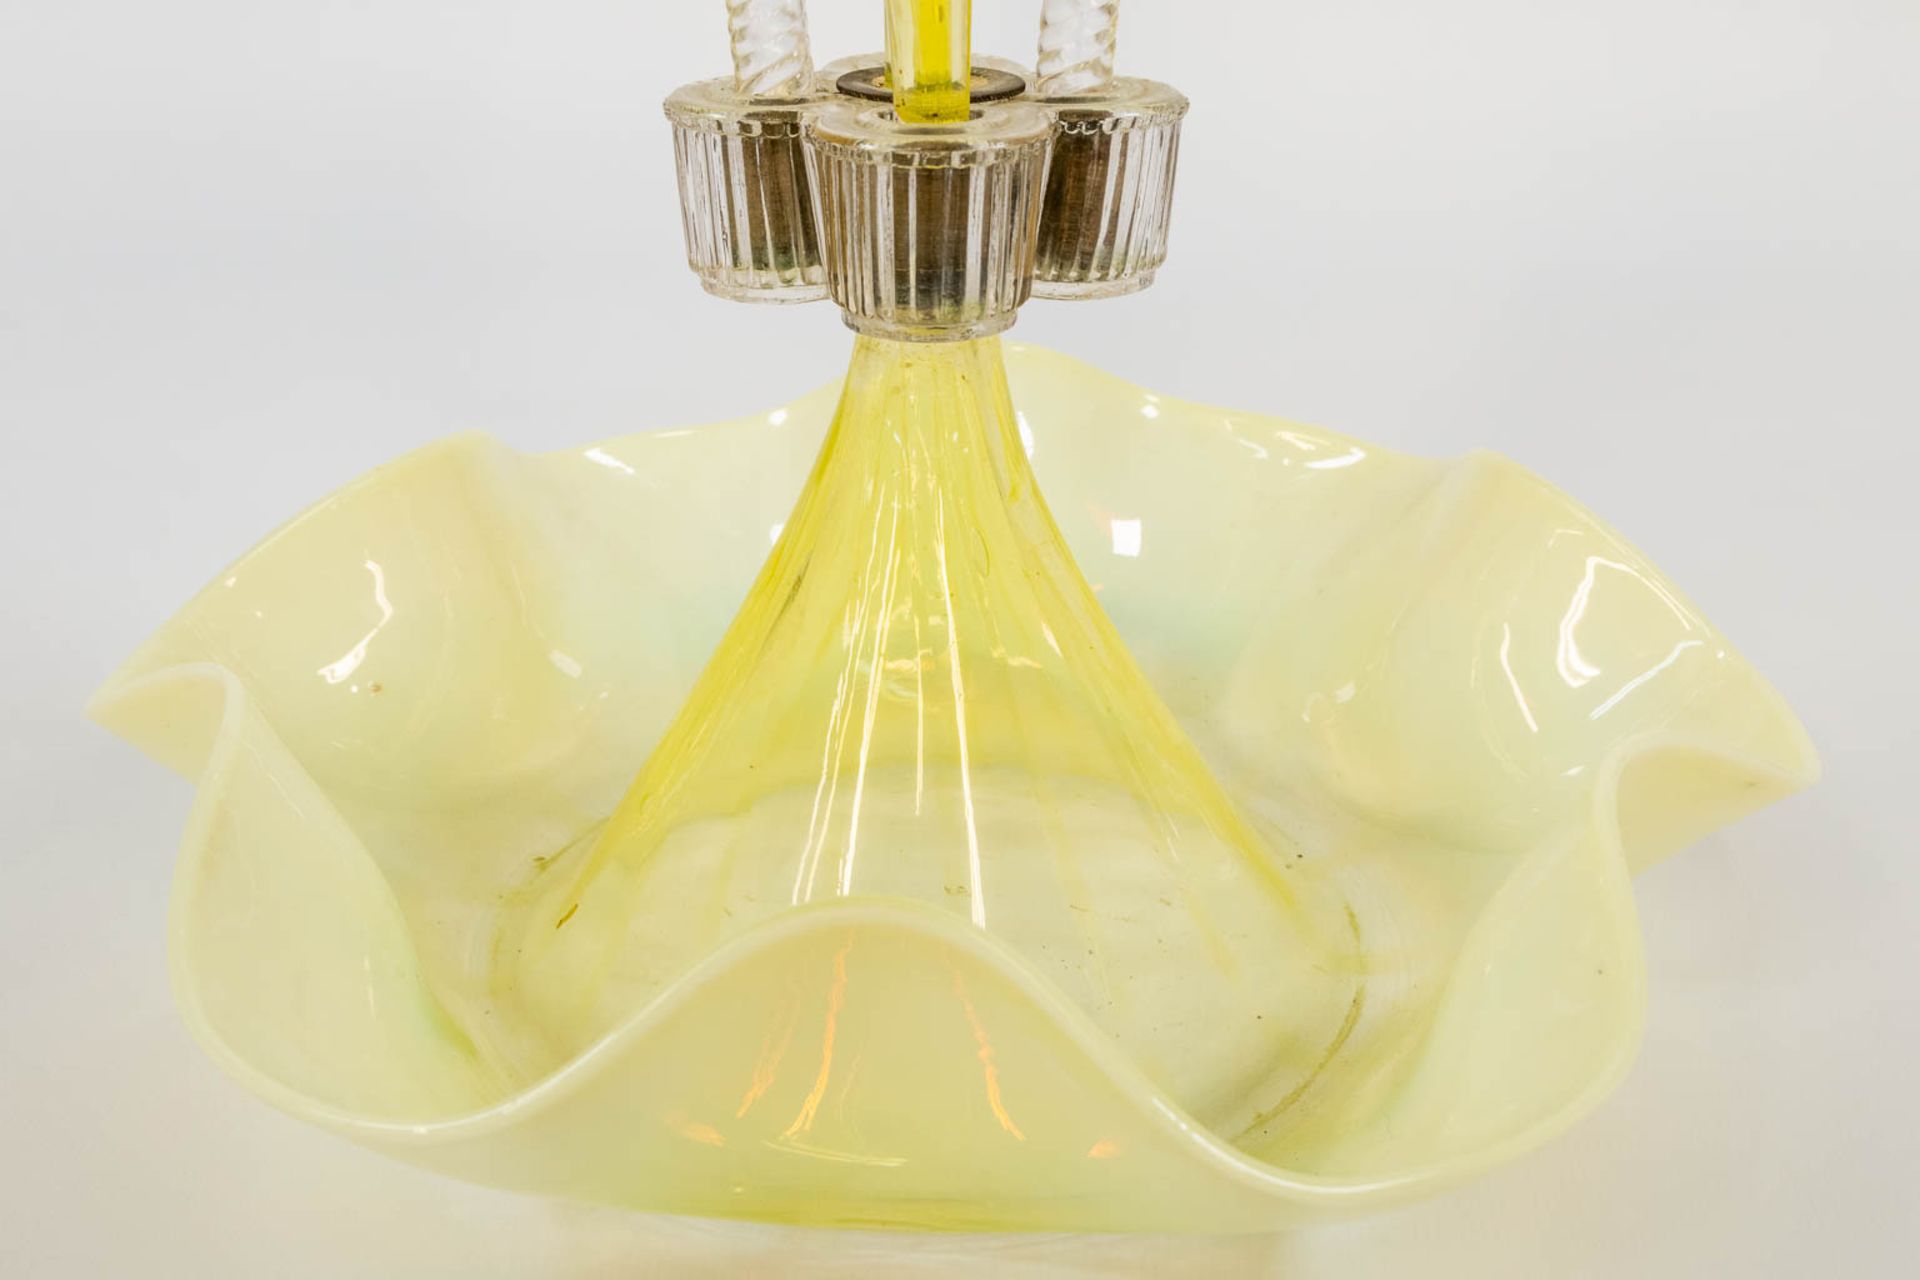 A yellow and clear glass table centrepiece pic-fleur, made in Murano, Italy. (25 x 28 x 45 cm) - Image 10 of 15